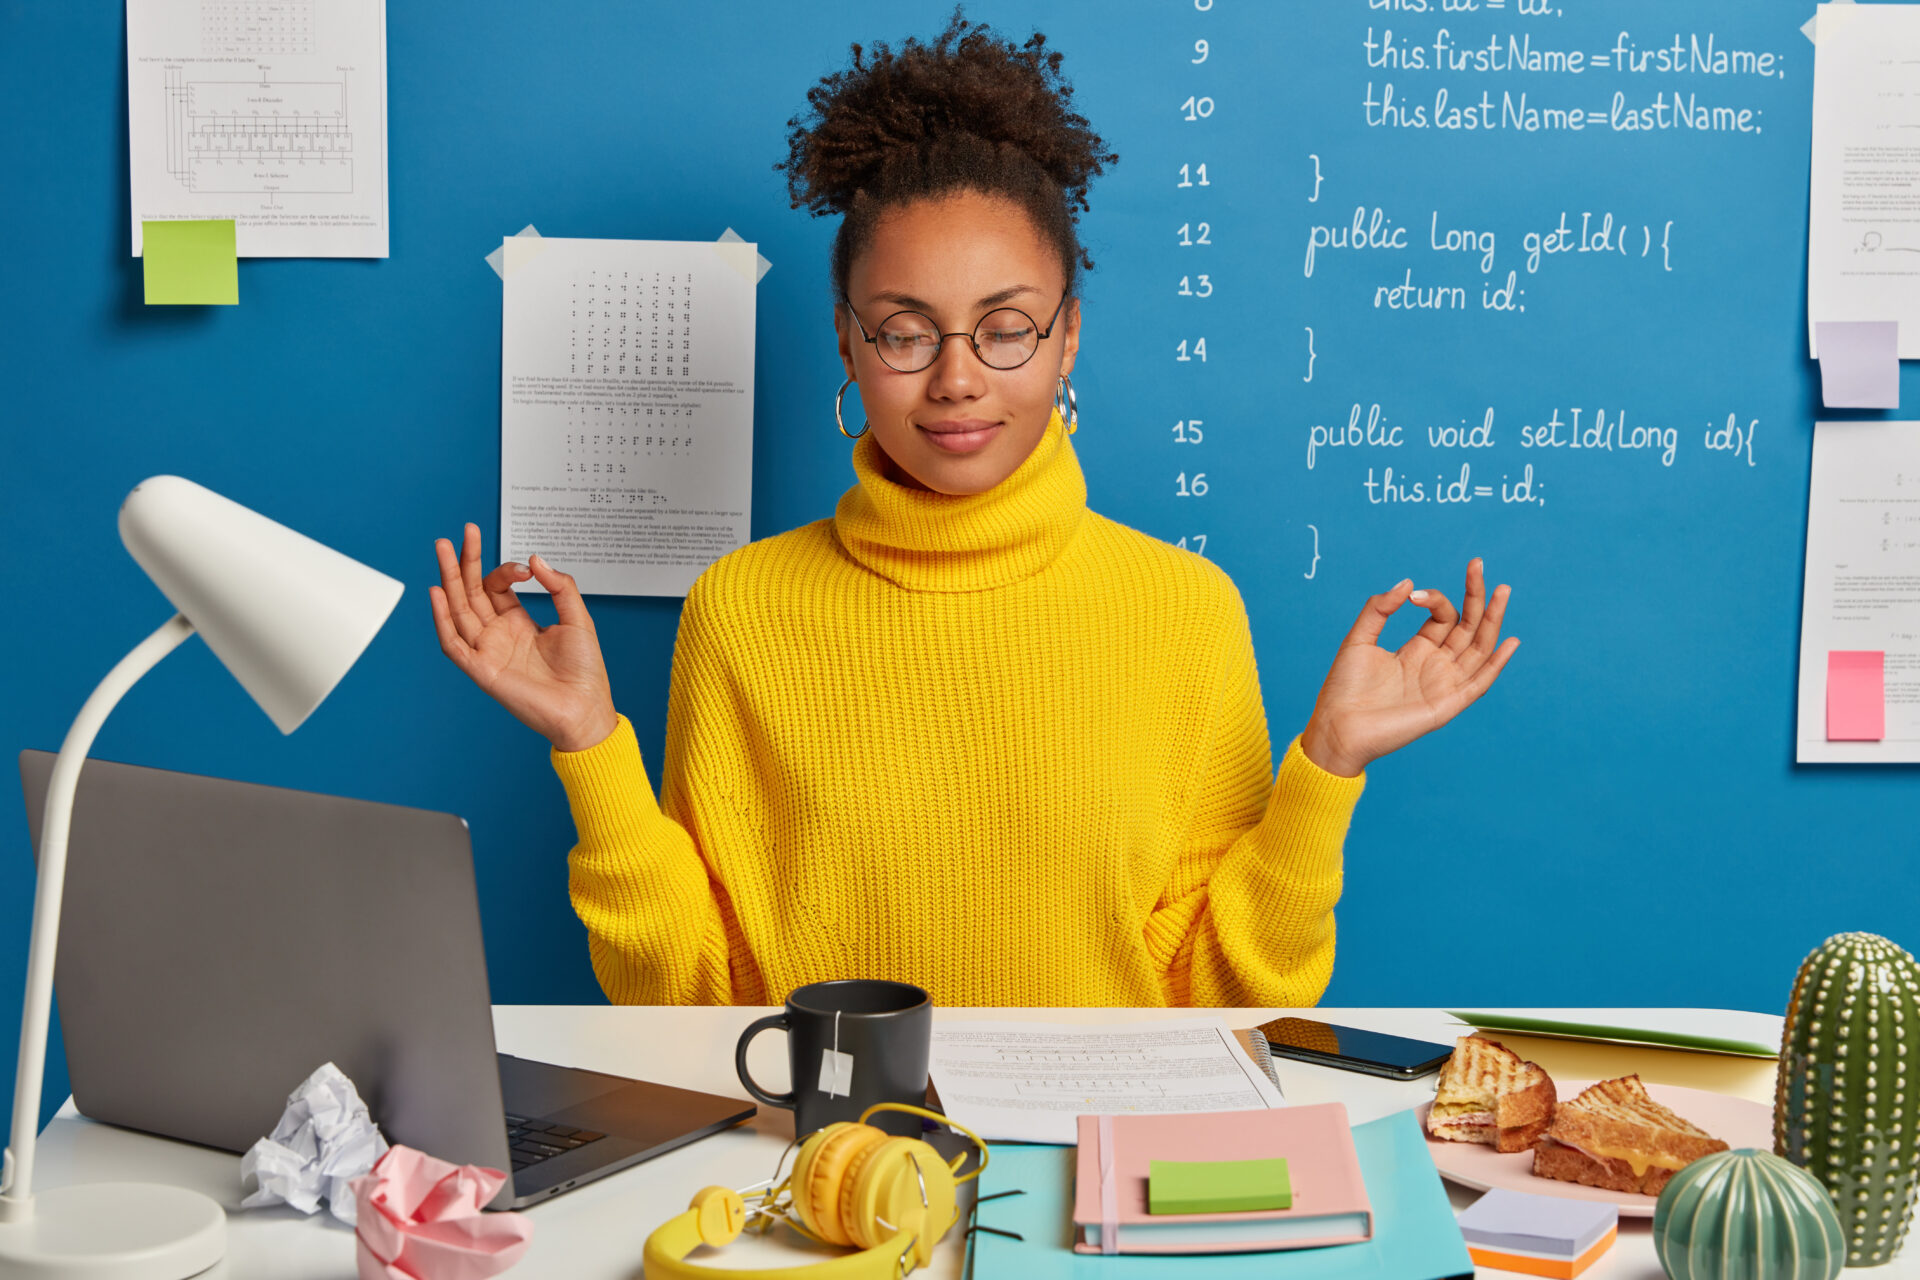 Woman freelance worker does yoga exersice at workplace, enjoys calm tranquil atmosphere, wears round glasses and jumper, gathers with thoughts, takes break after working on laptop and with papers